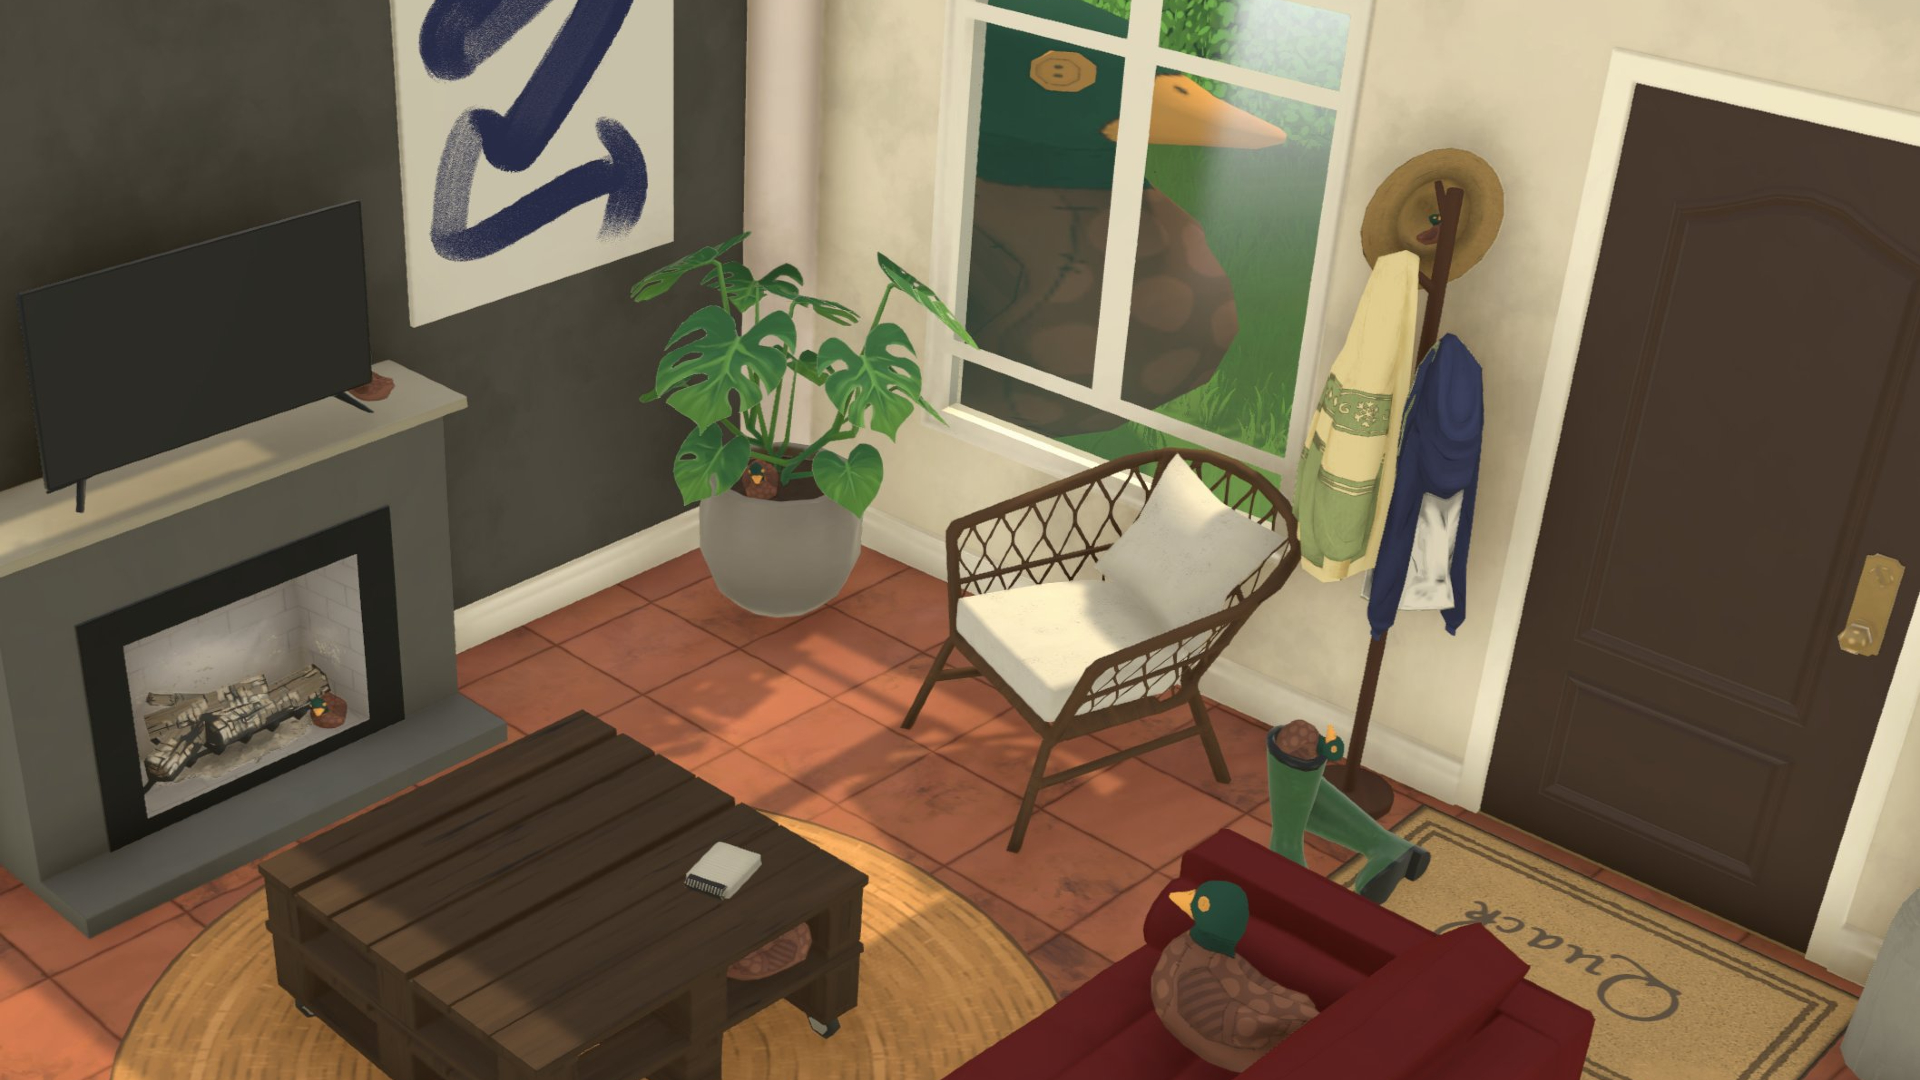 A living room in the game Paralives featuring a fireplace, table, couch, and two duck plushies. One plush is on the couch and the other is massive at the window.